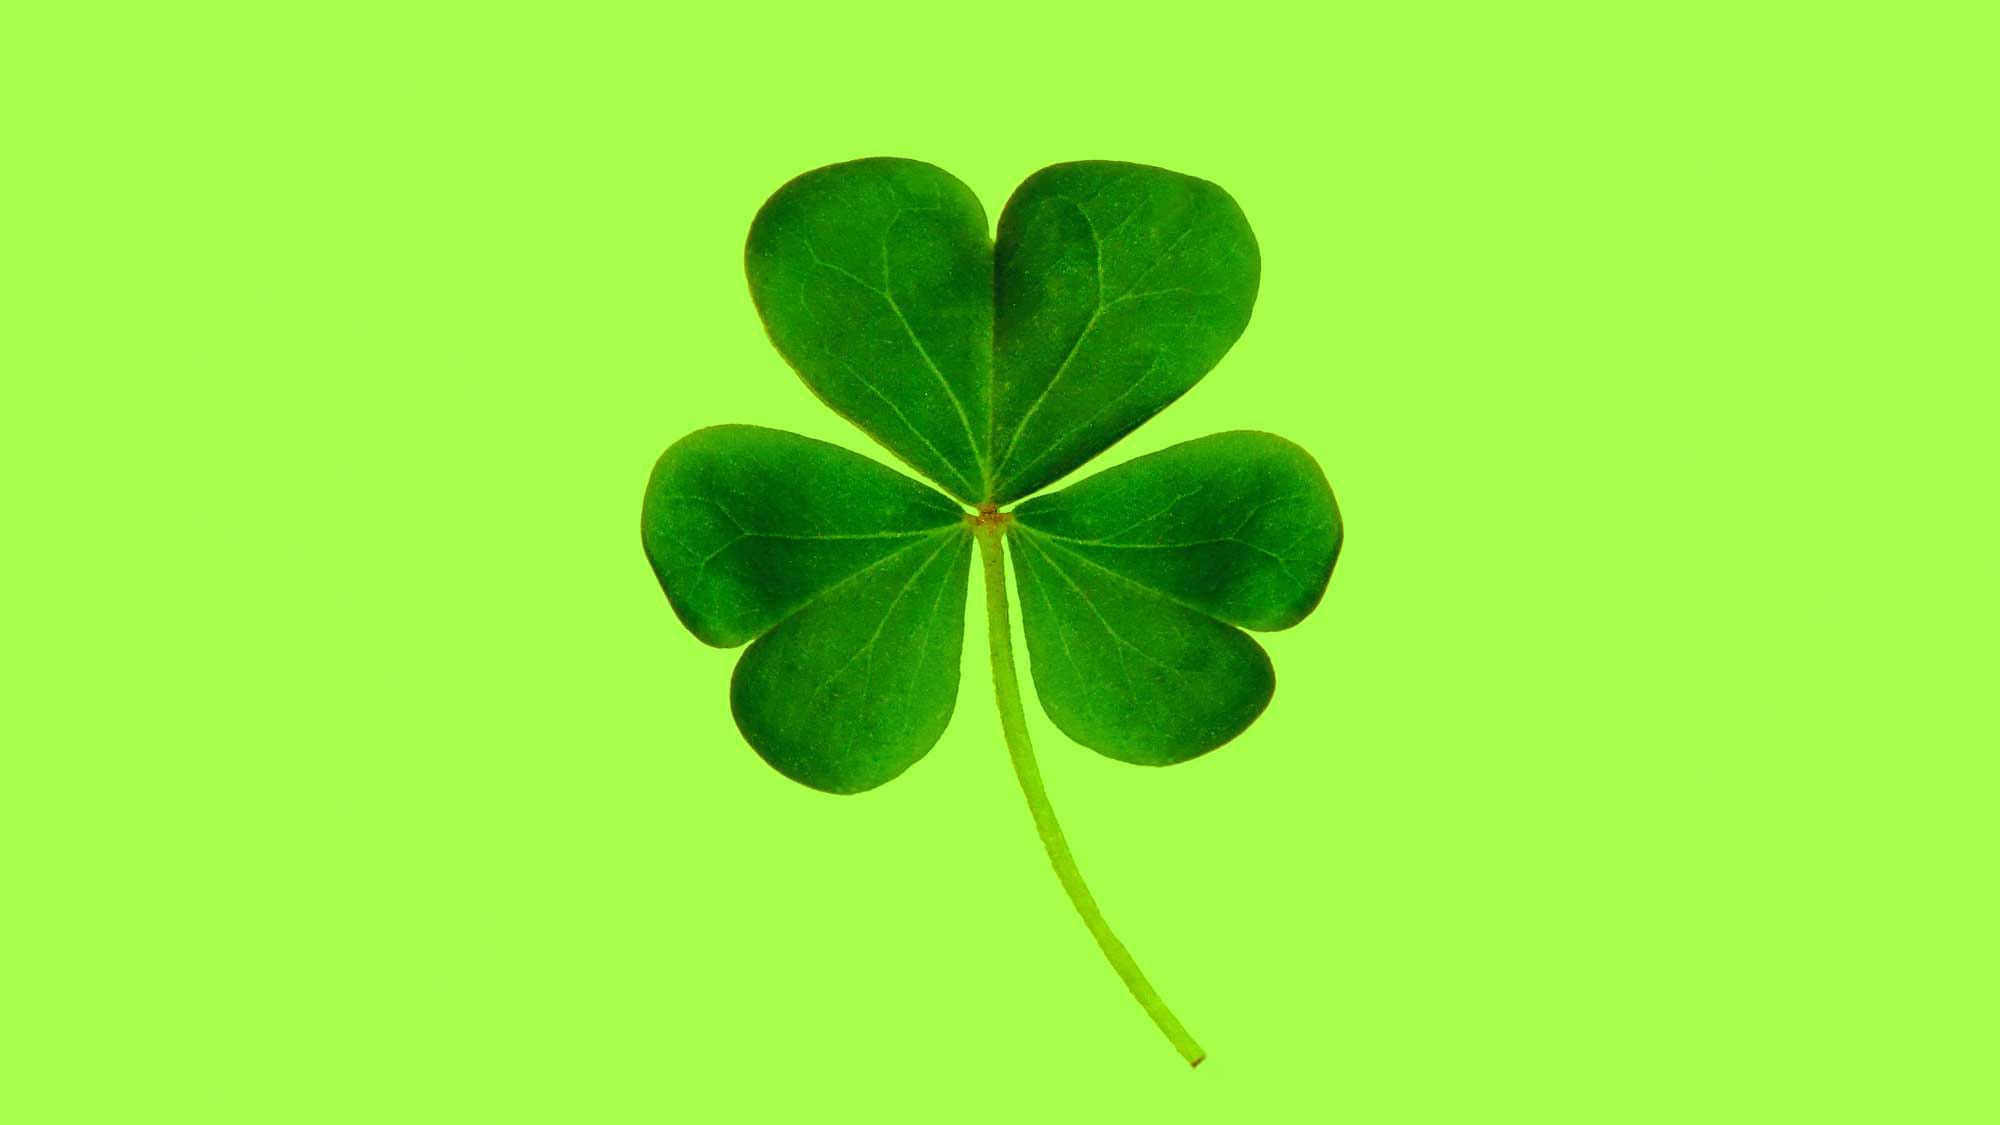 Featured image for “Luck of the Irish”